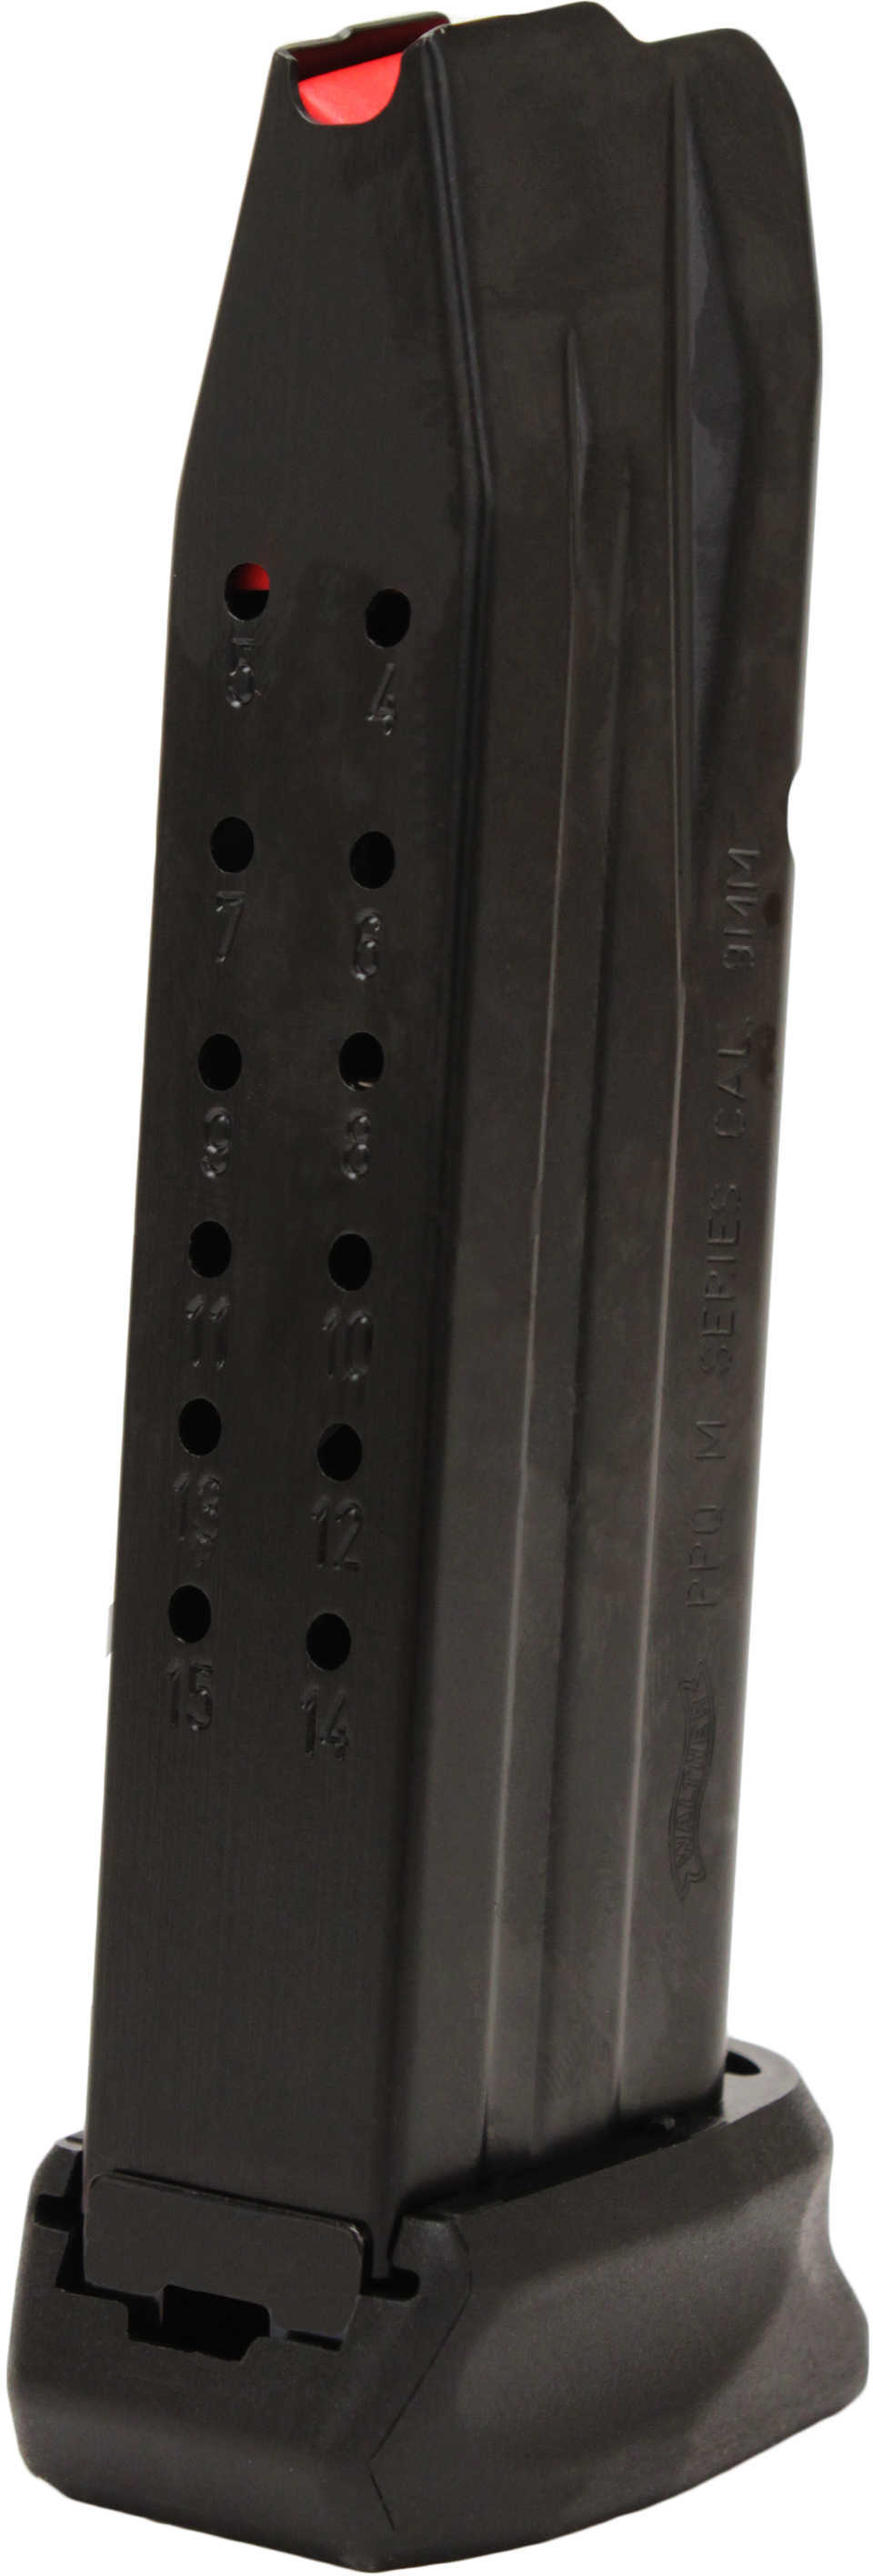 Walther Arms Magazine PPQ M2 9MM 17Rd 2796694 ANIT-Friction Coating